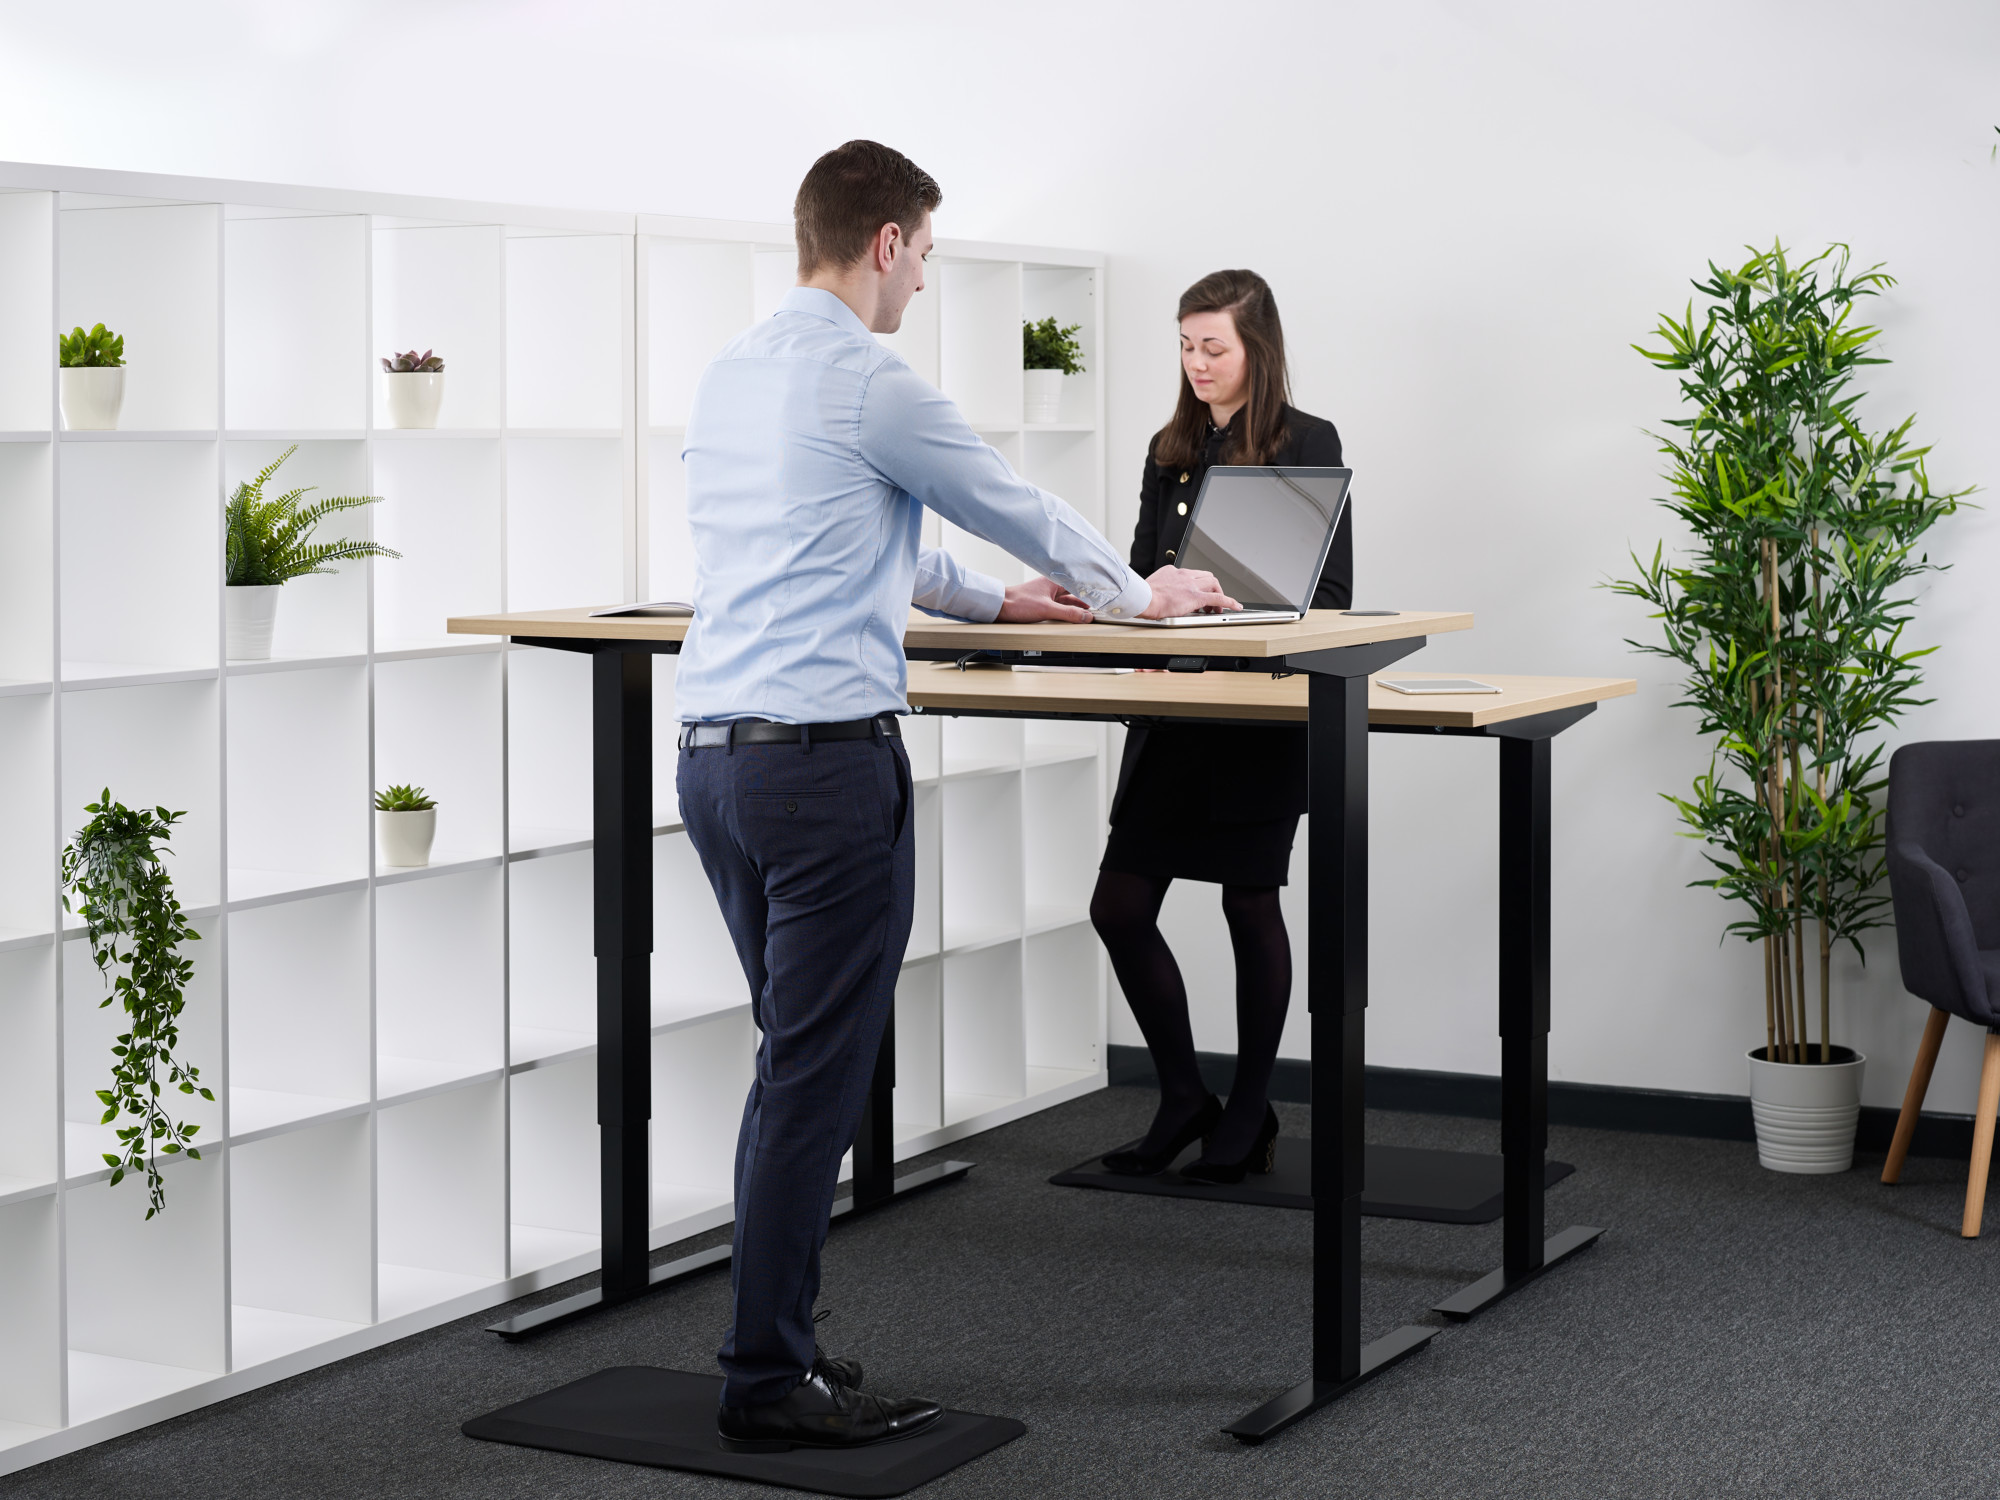 two people using standing desk at different heights